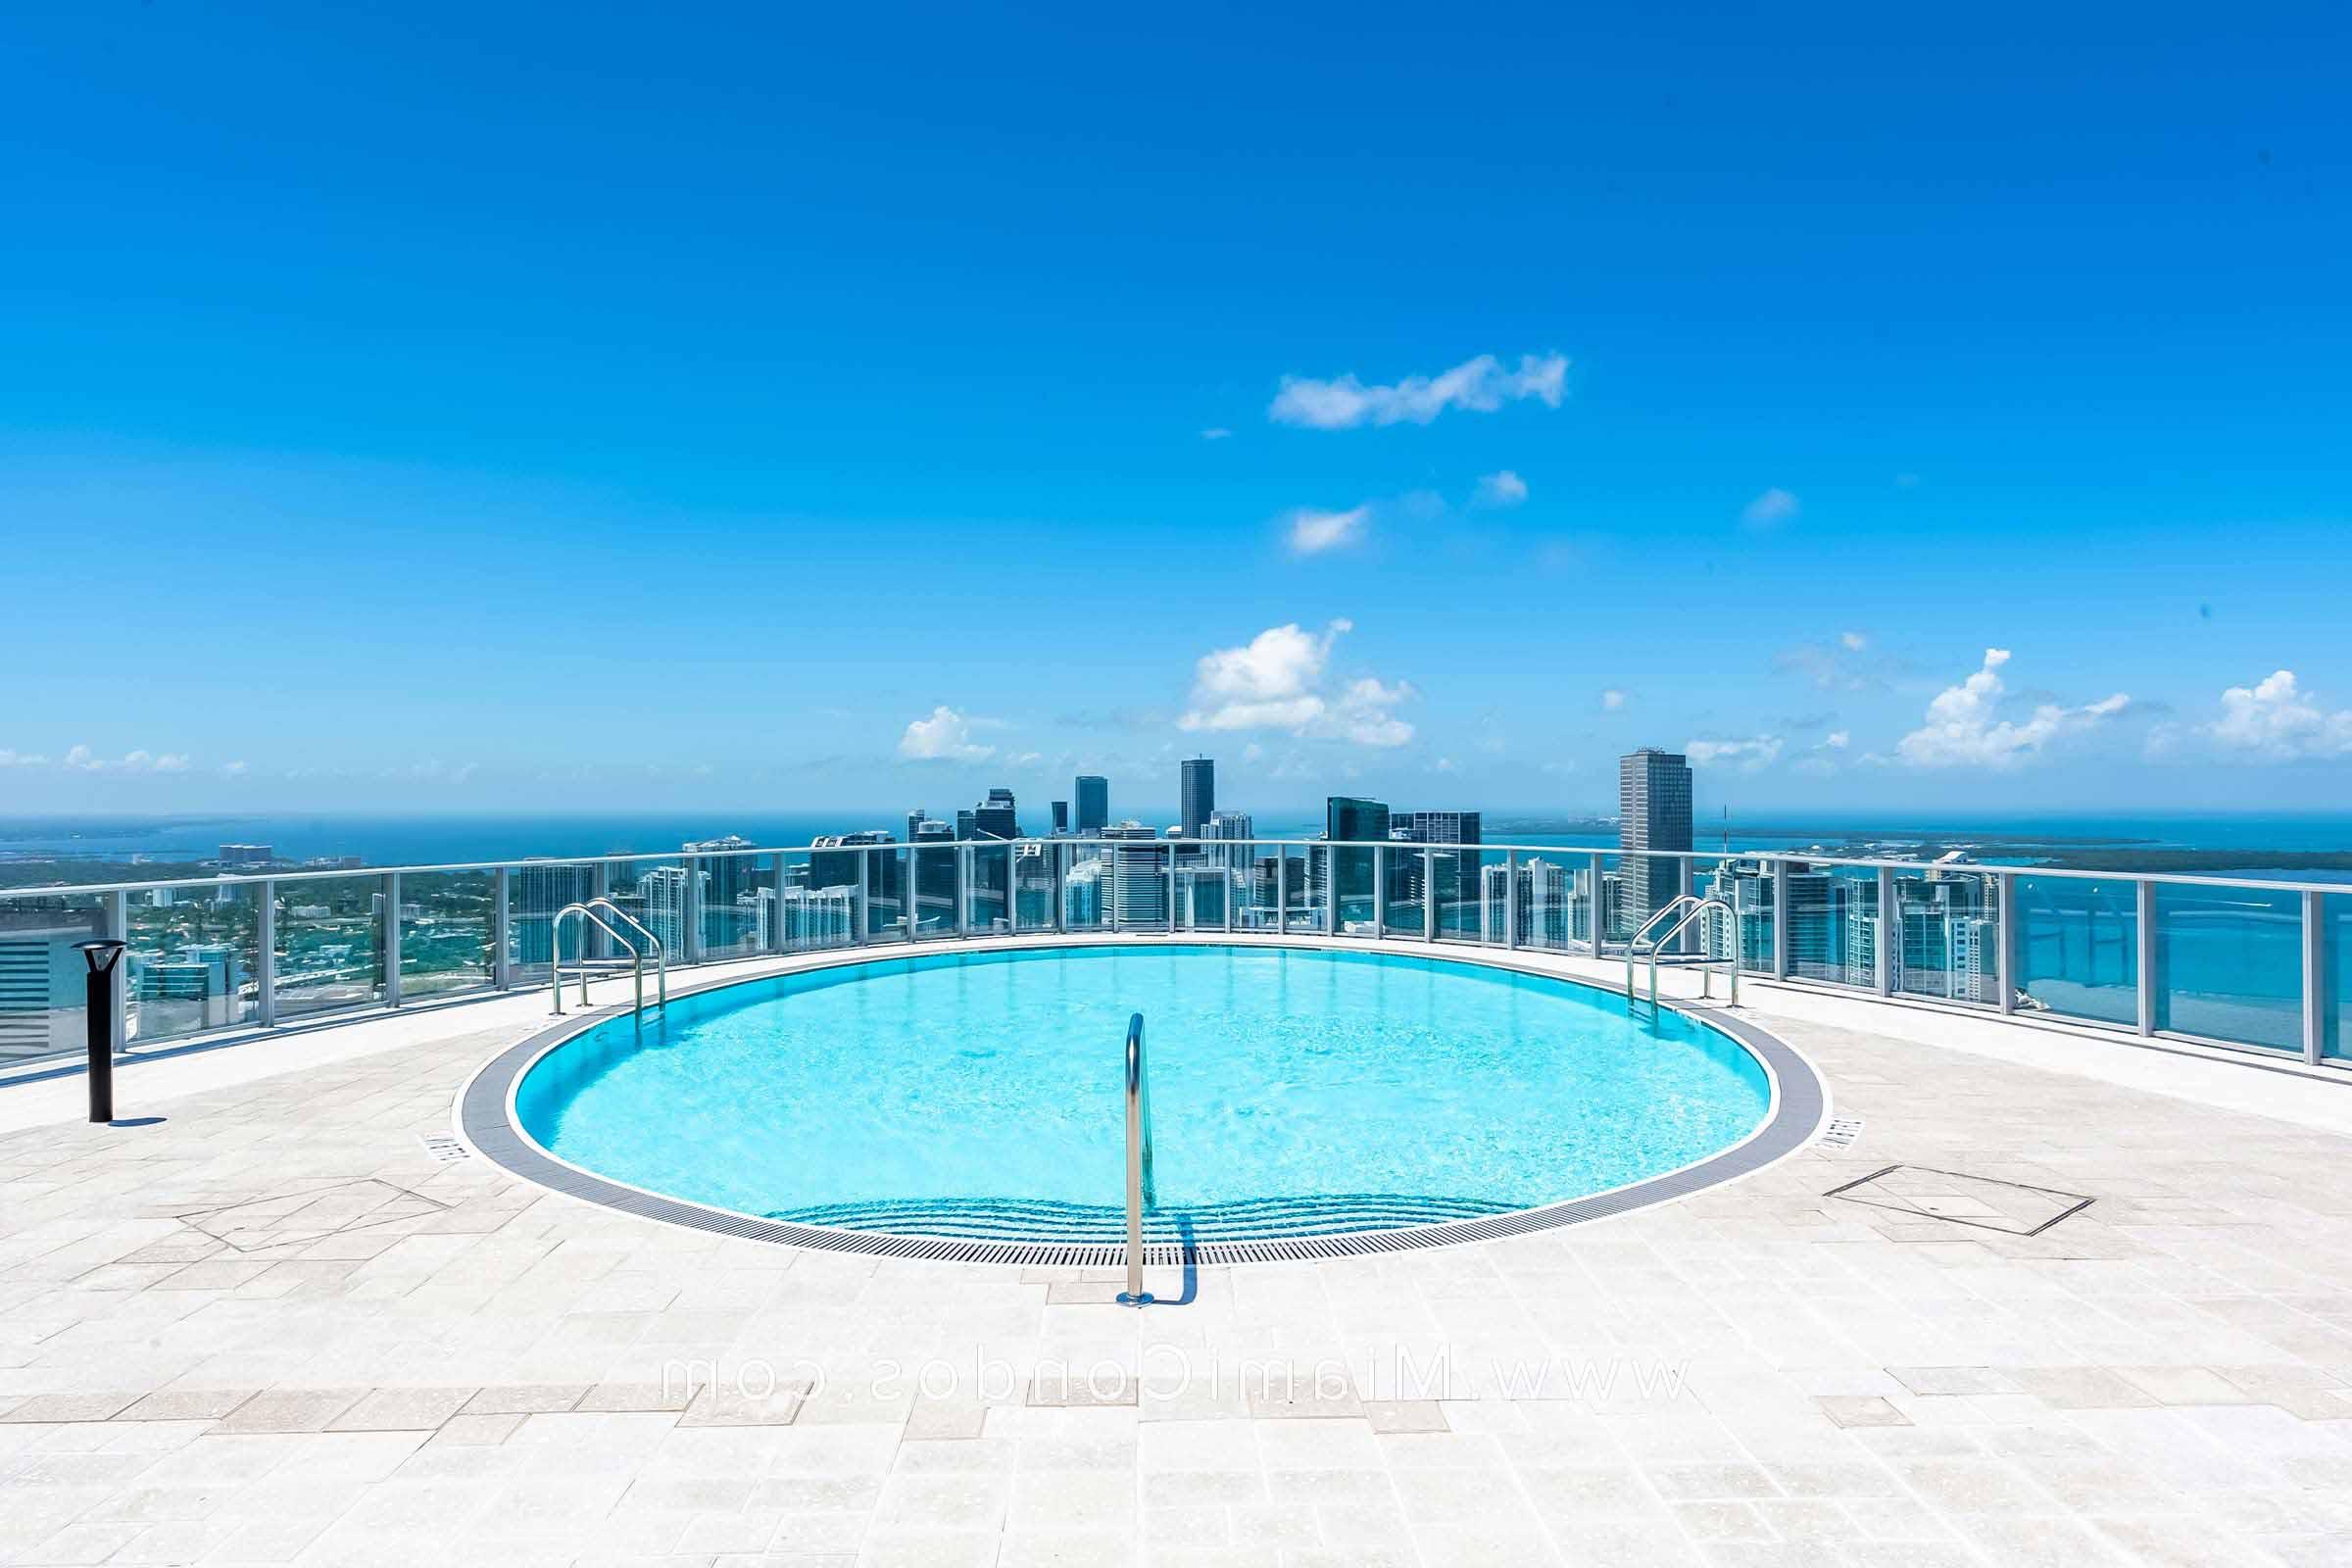 Paramount Miami Worldcenter Rooftop Pool